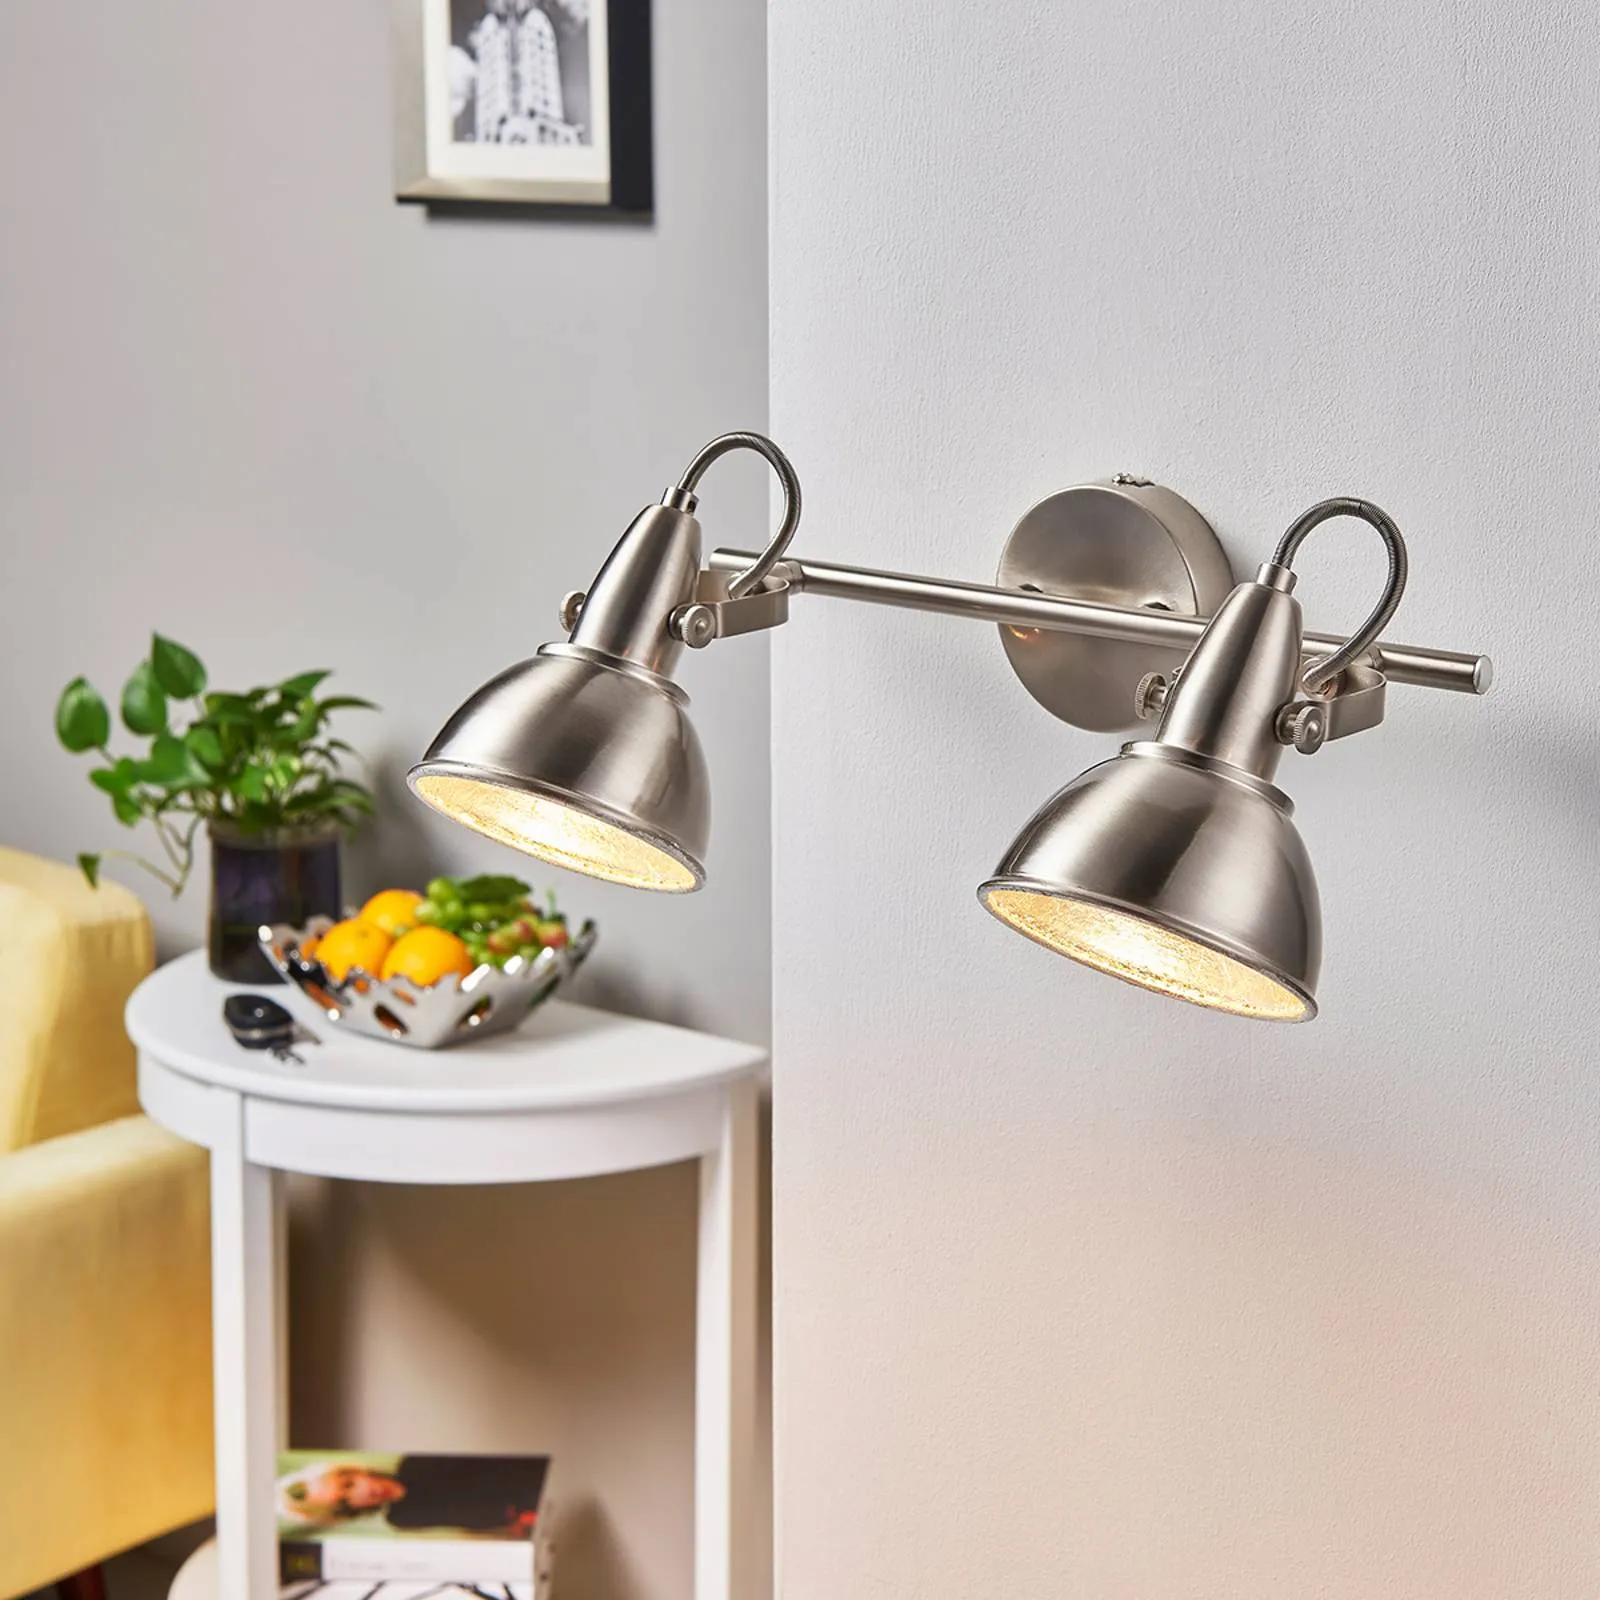 Julin wall spotlight with two lampshades, nickel